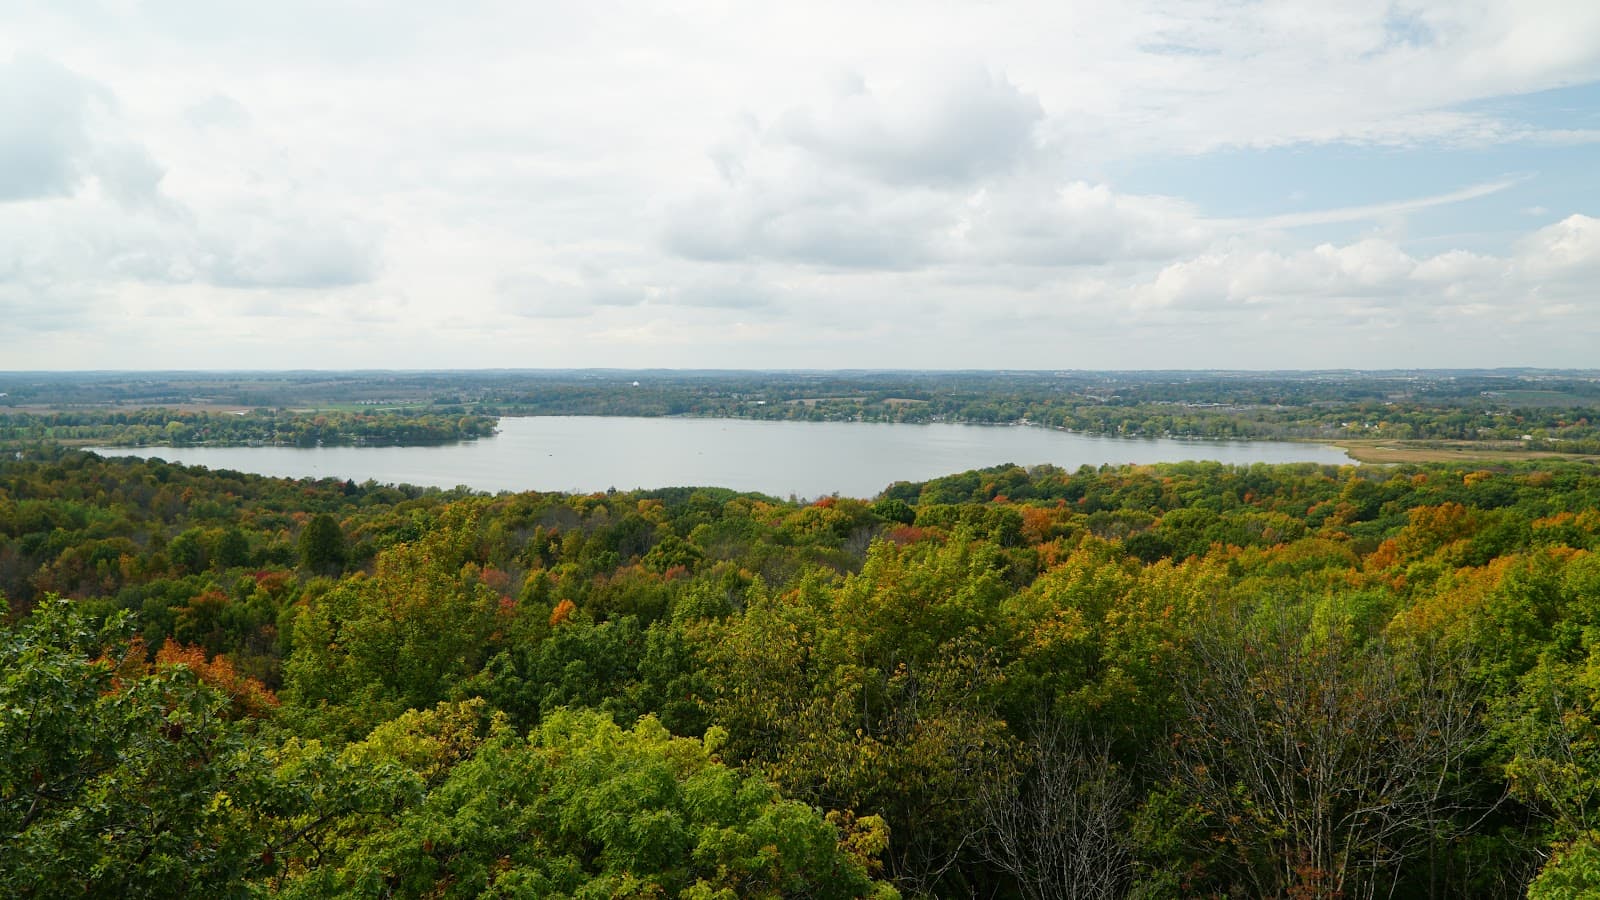 Sandee - Kettle Moraine State Forest - Pike Lake Unit